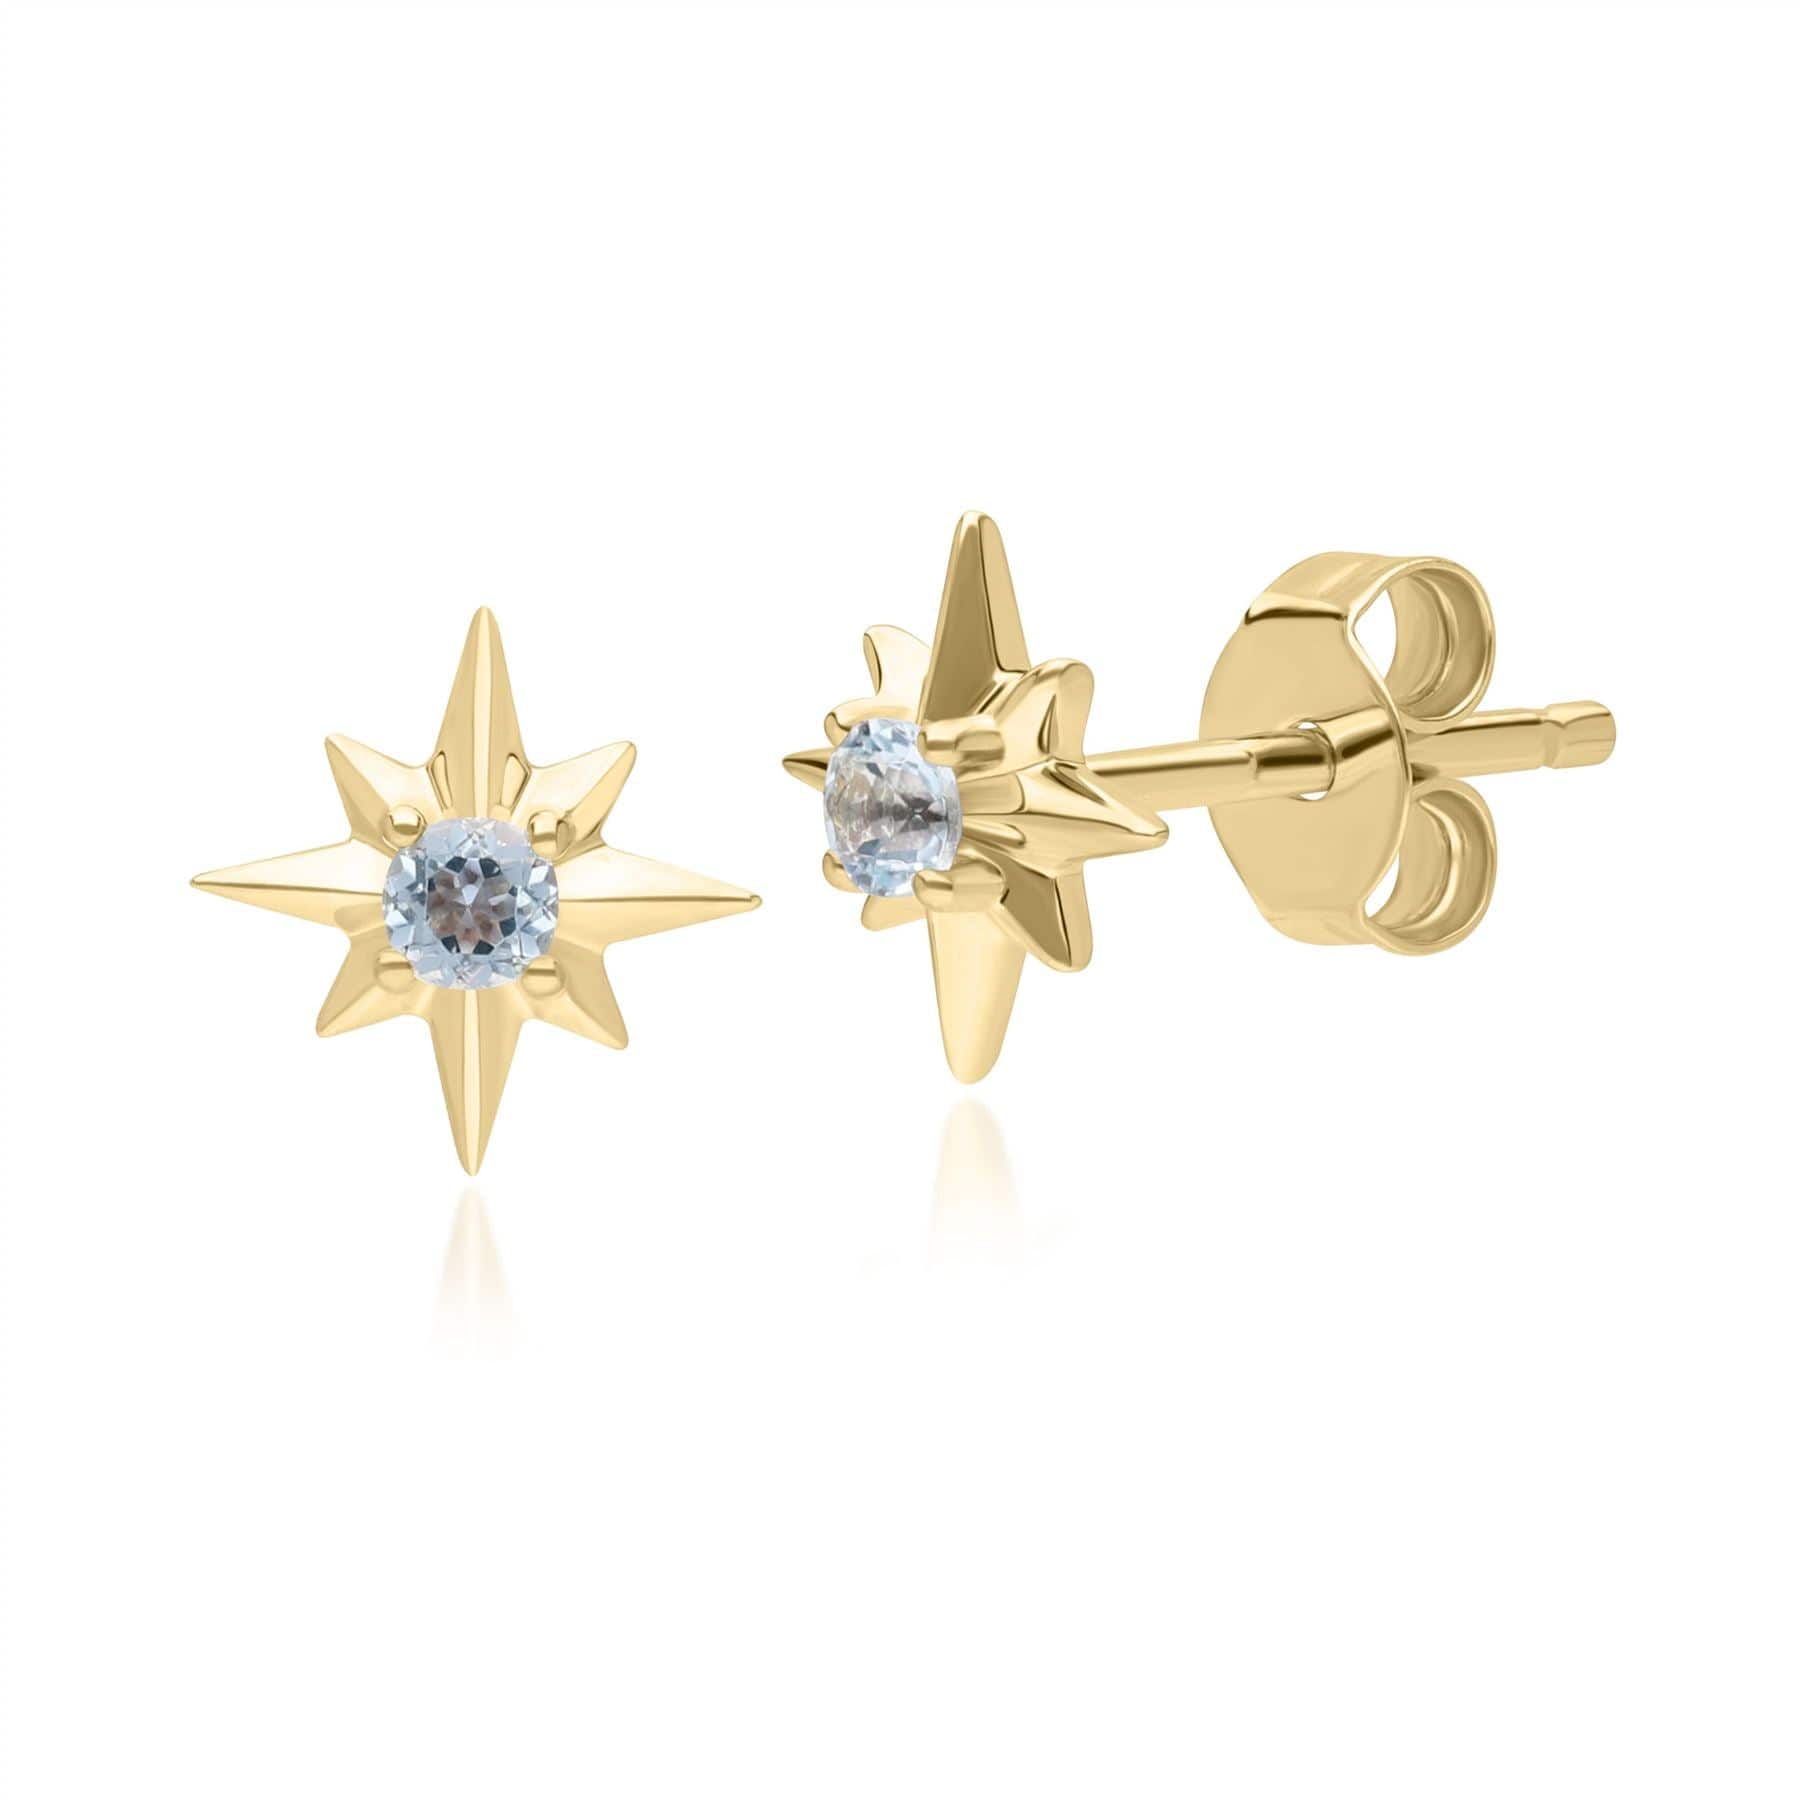 135E1821039 Night Sky Topaz Star Stud Earrings in 9ct Yellow Gold Front